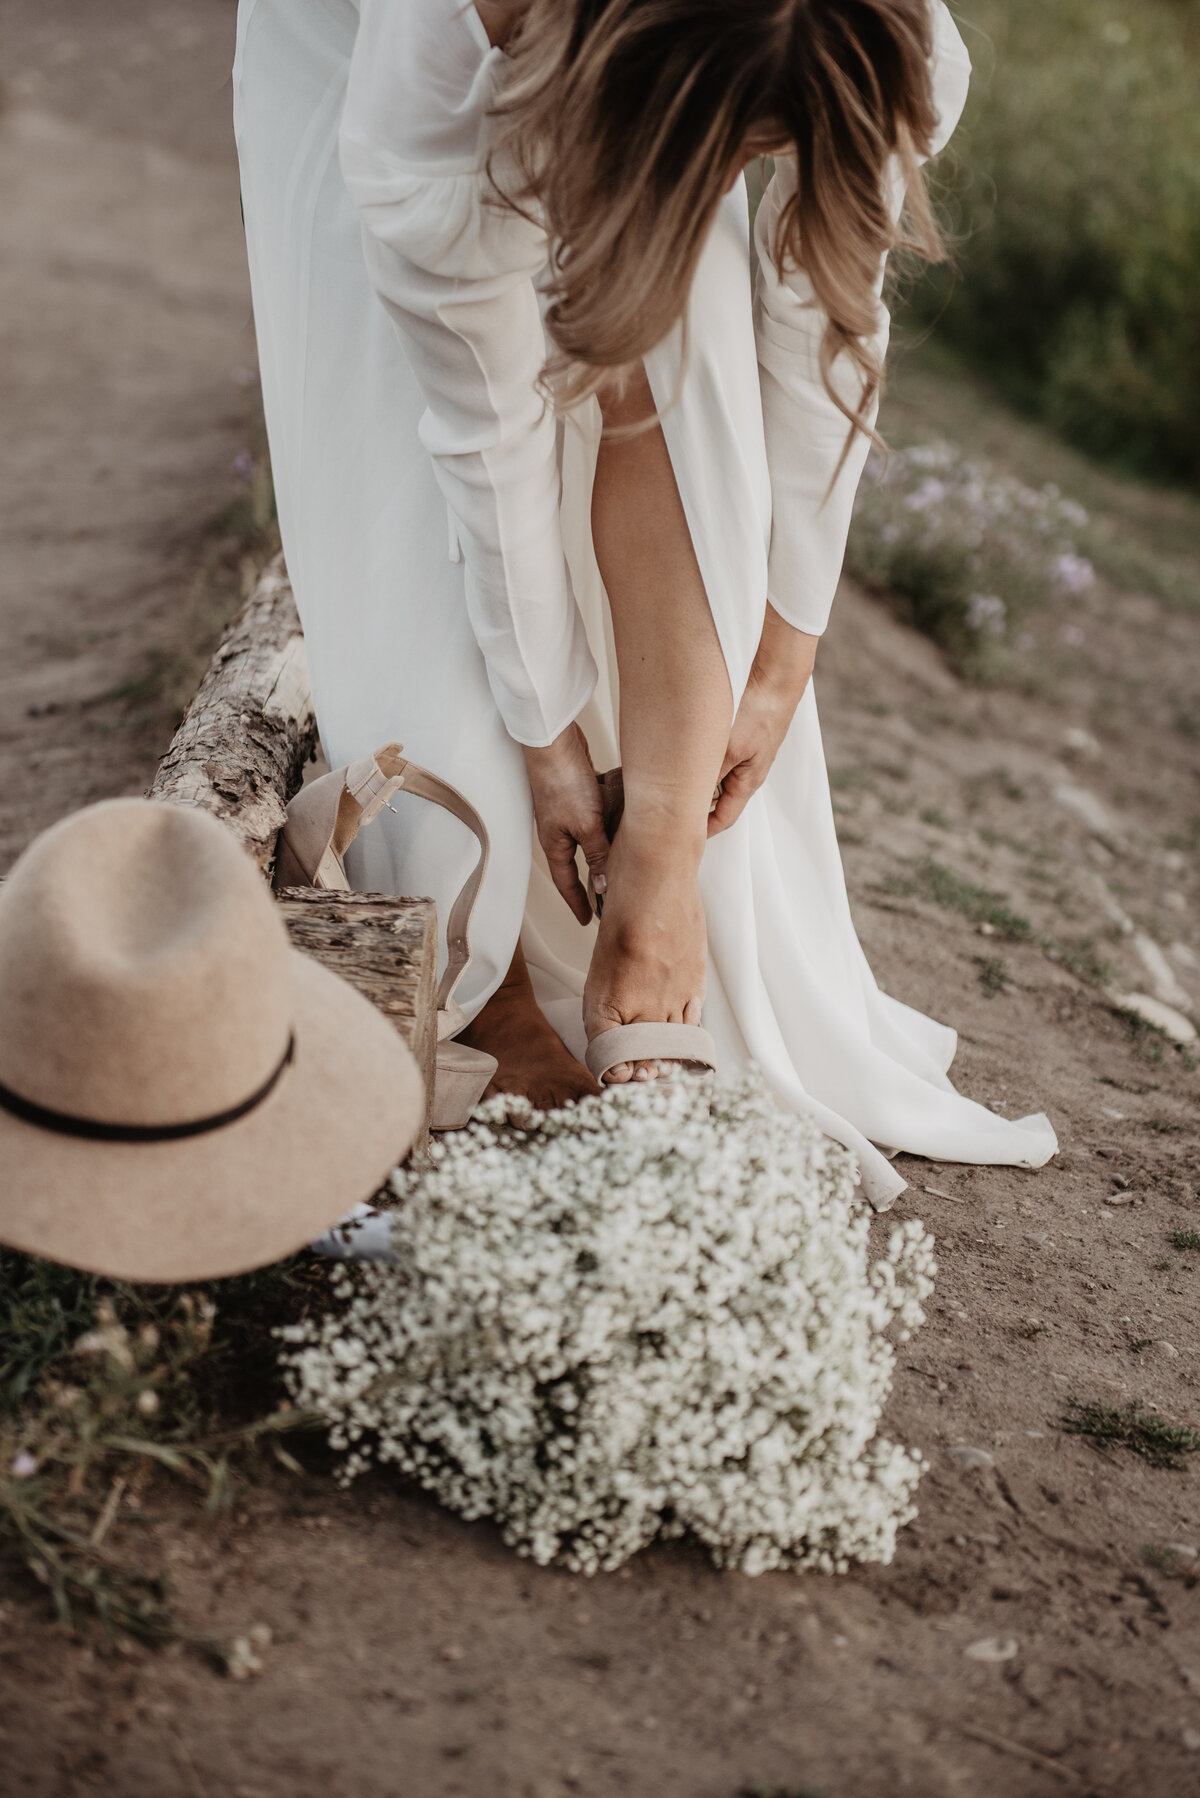 jackson wyoming photographer captures Bride putting on her wedding shoes in the Tetons with her hat and white floral bouquet sitting next to her